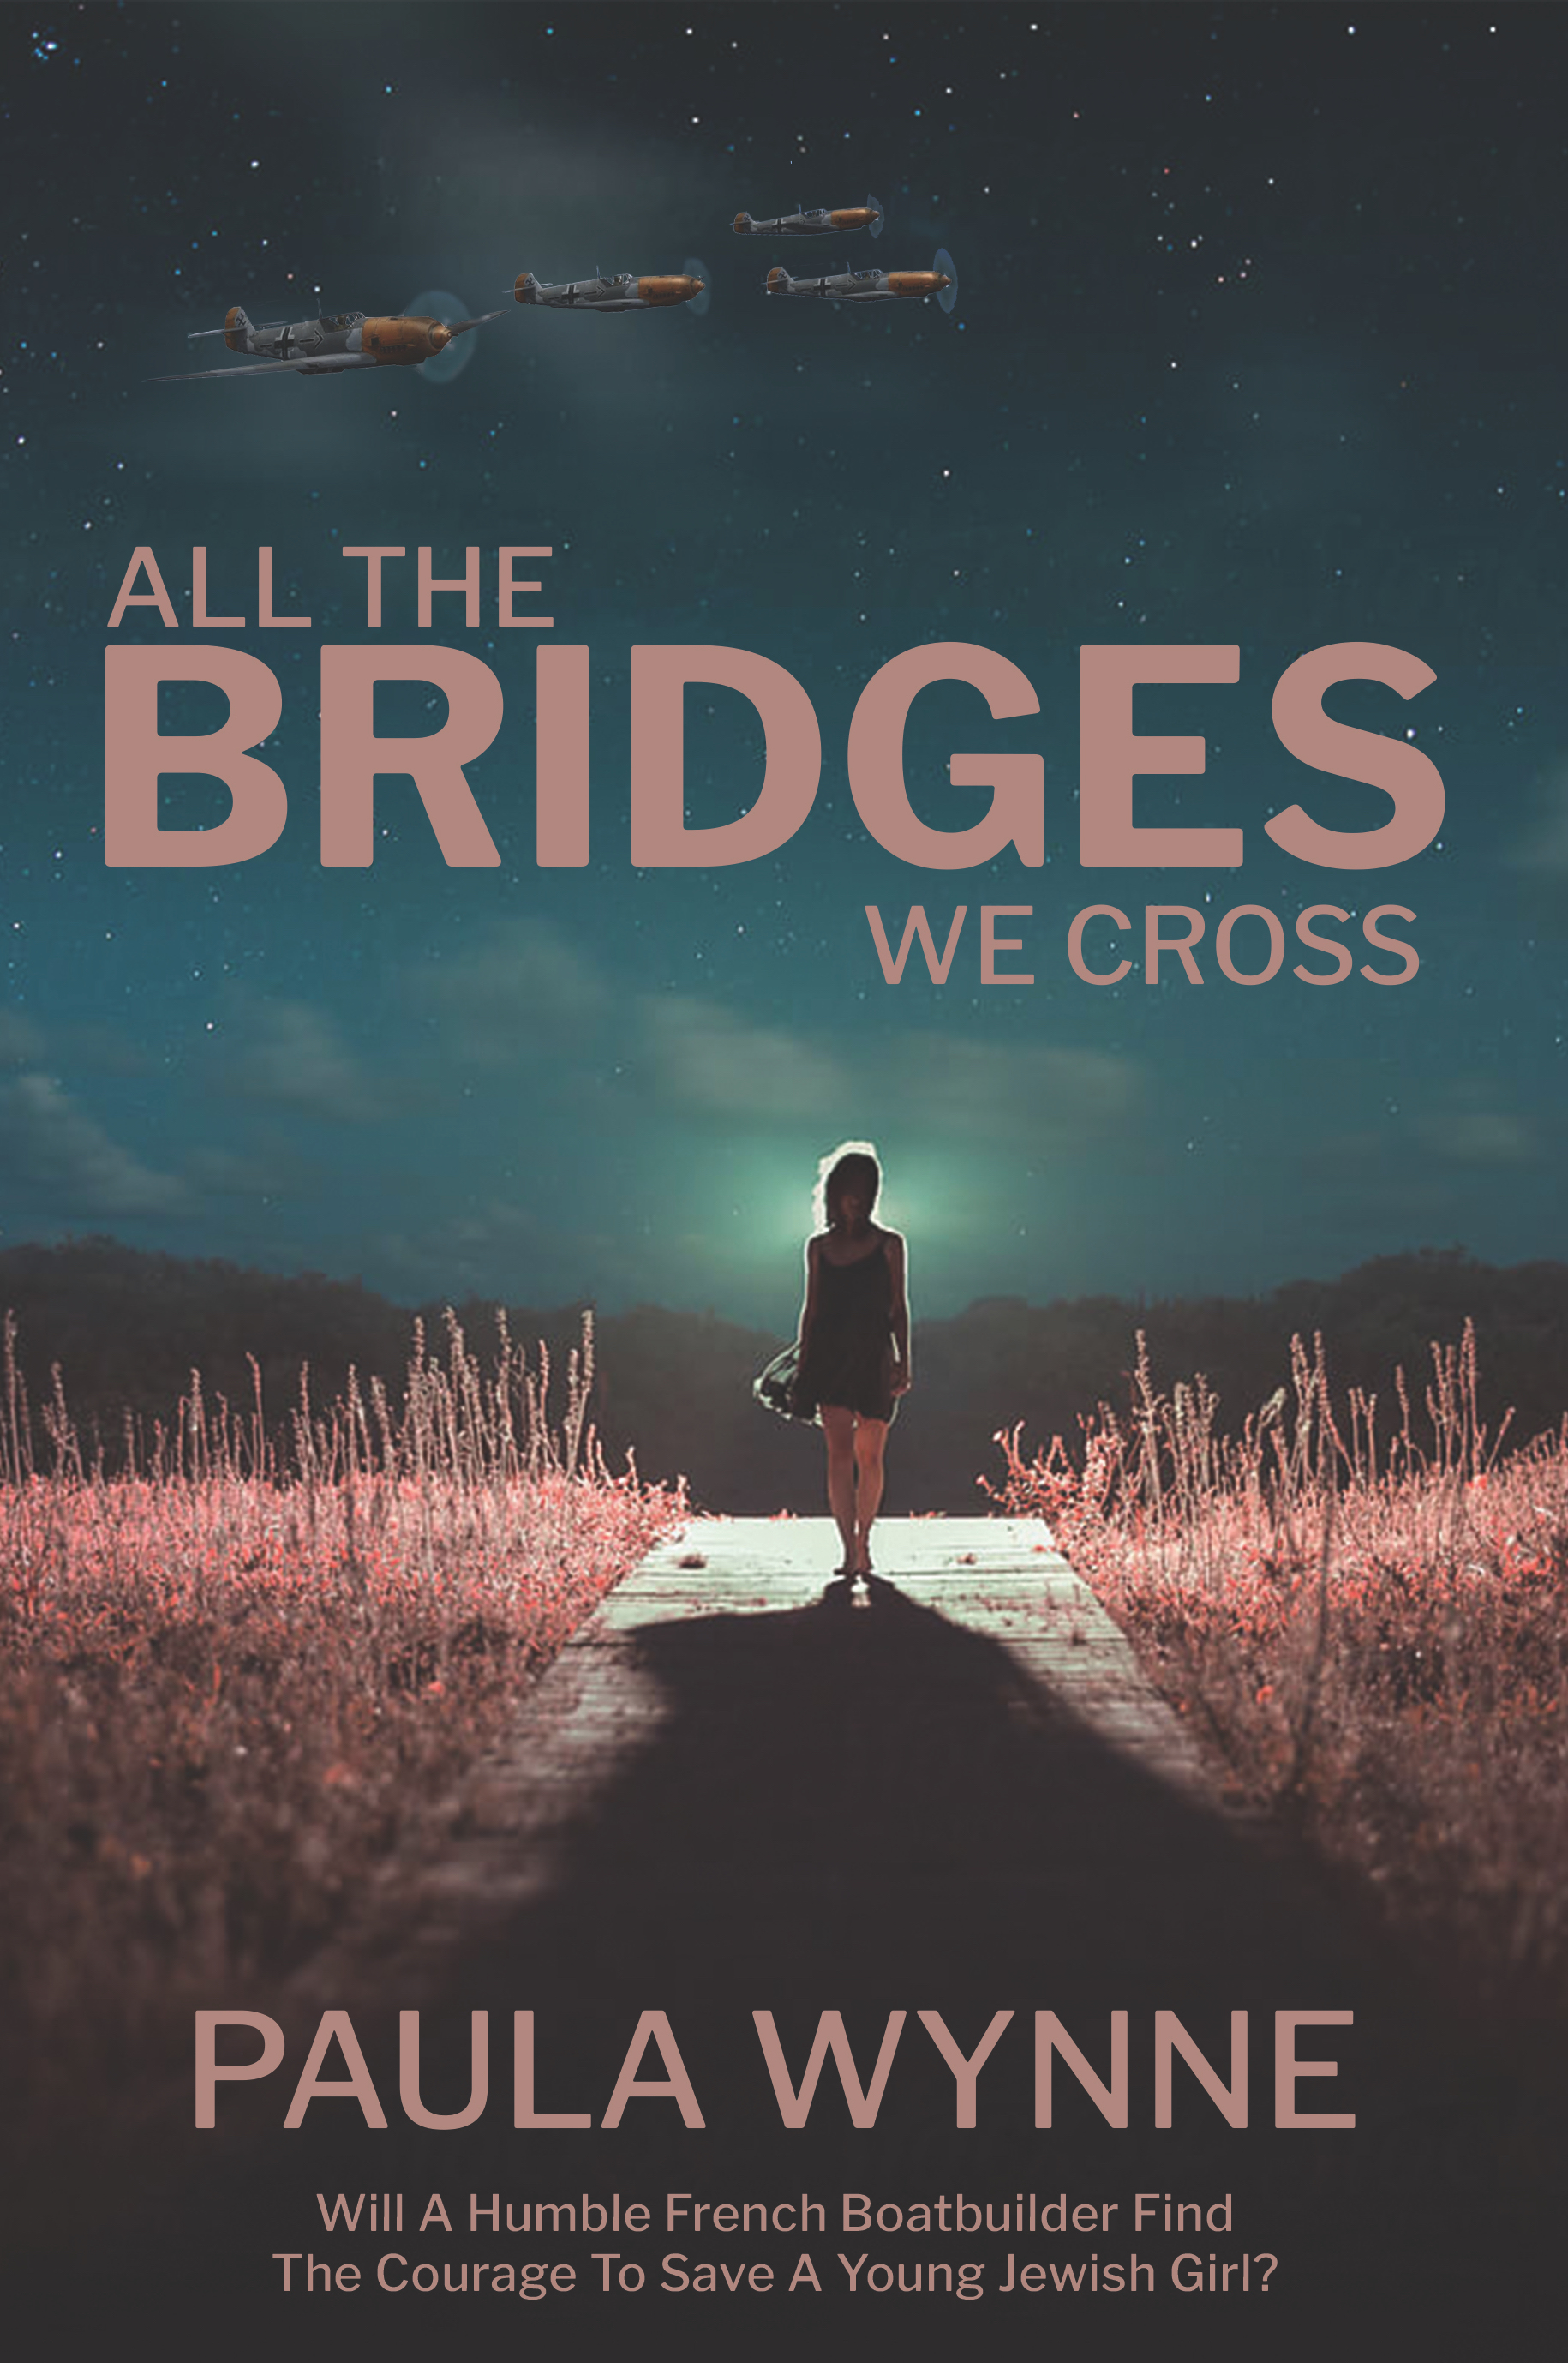 All The Bridges We Cross review copies available